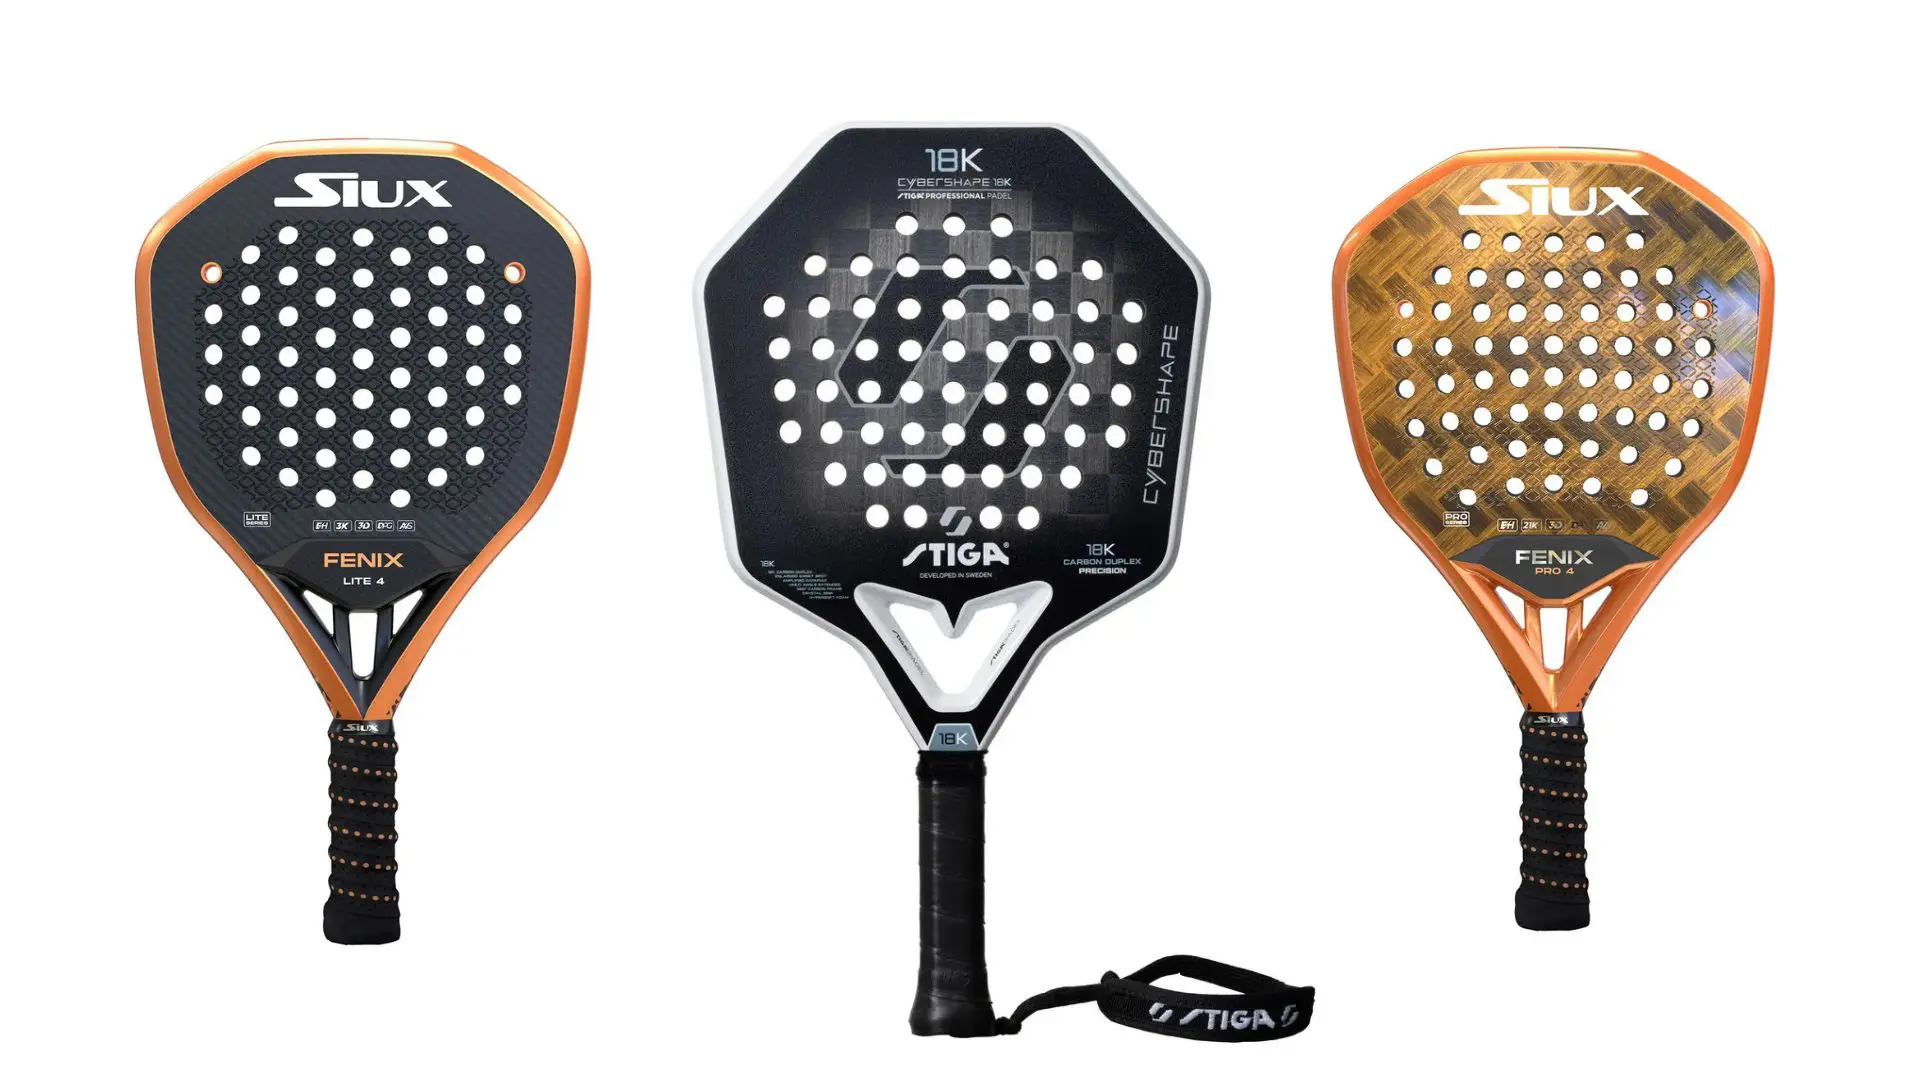 Snowshoes padel : new formats appear